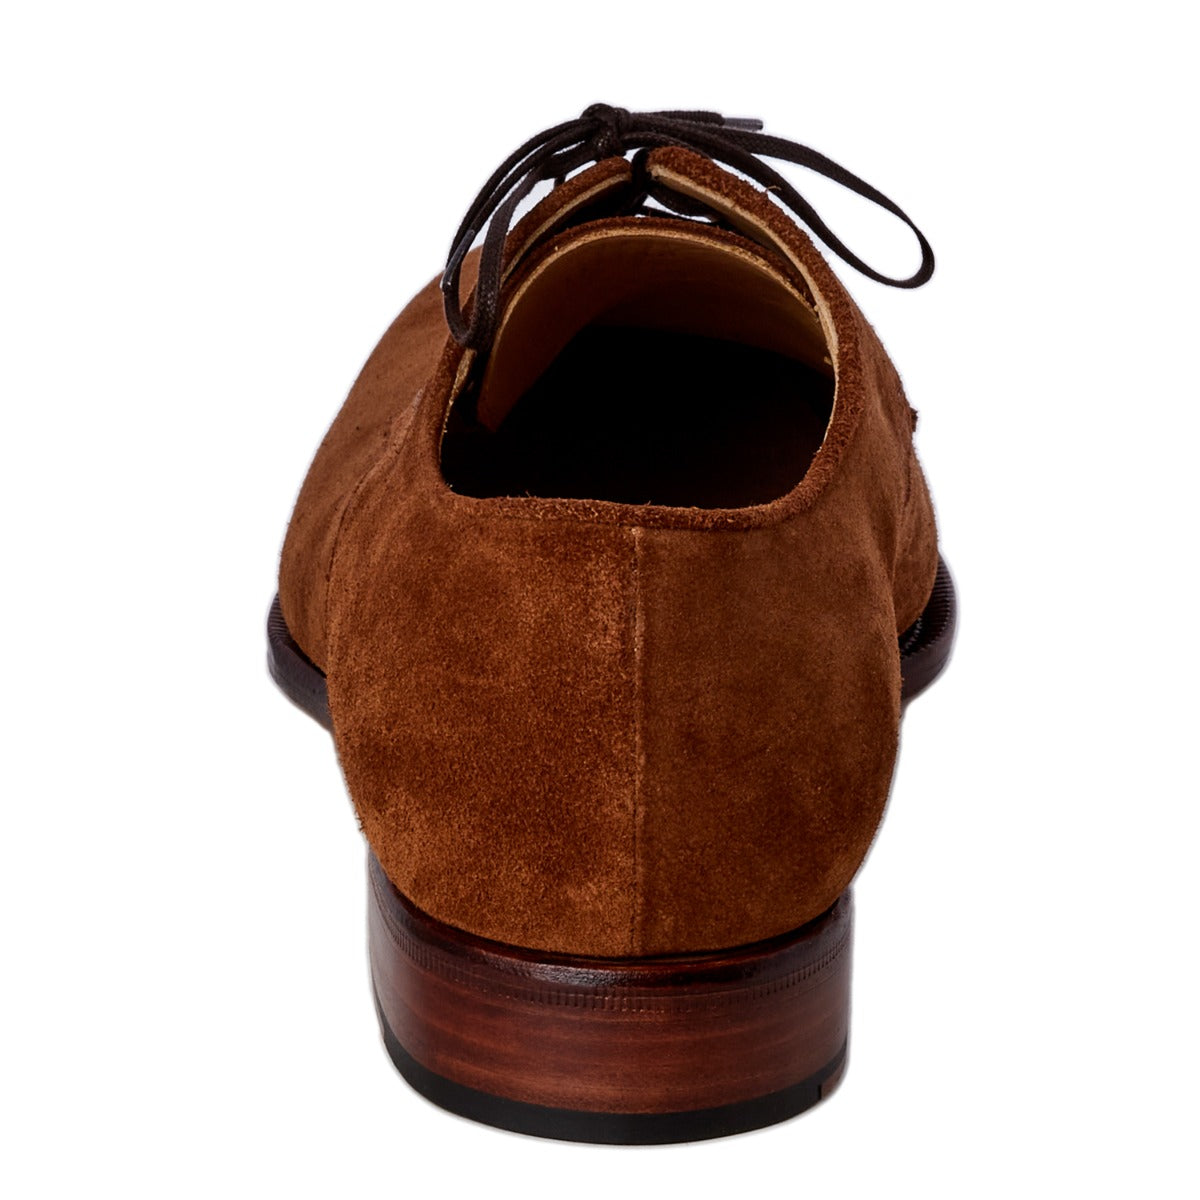 The TLB Medium Brown Derby 8.5UK shoe with a wooden sole, available at KirbyAllison.com.